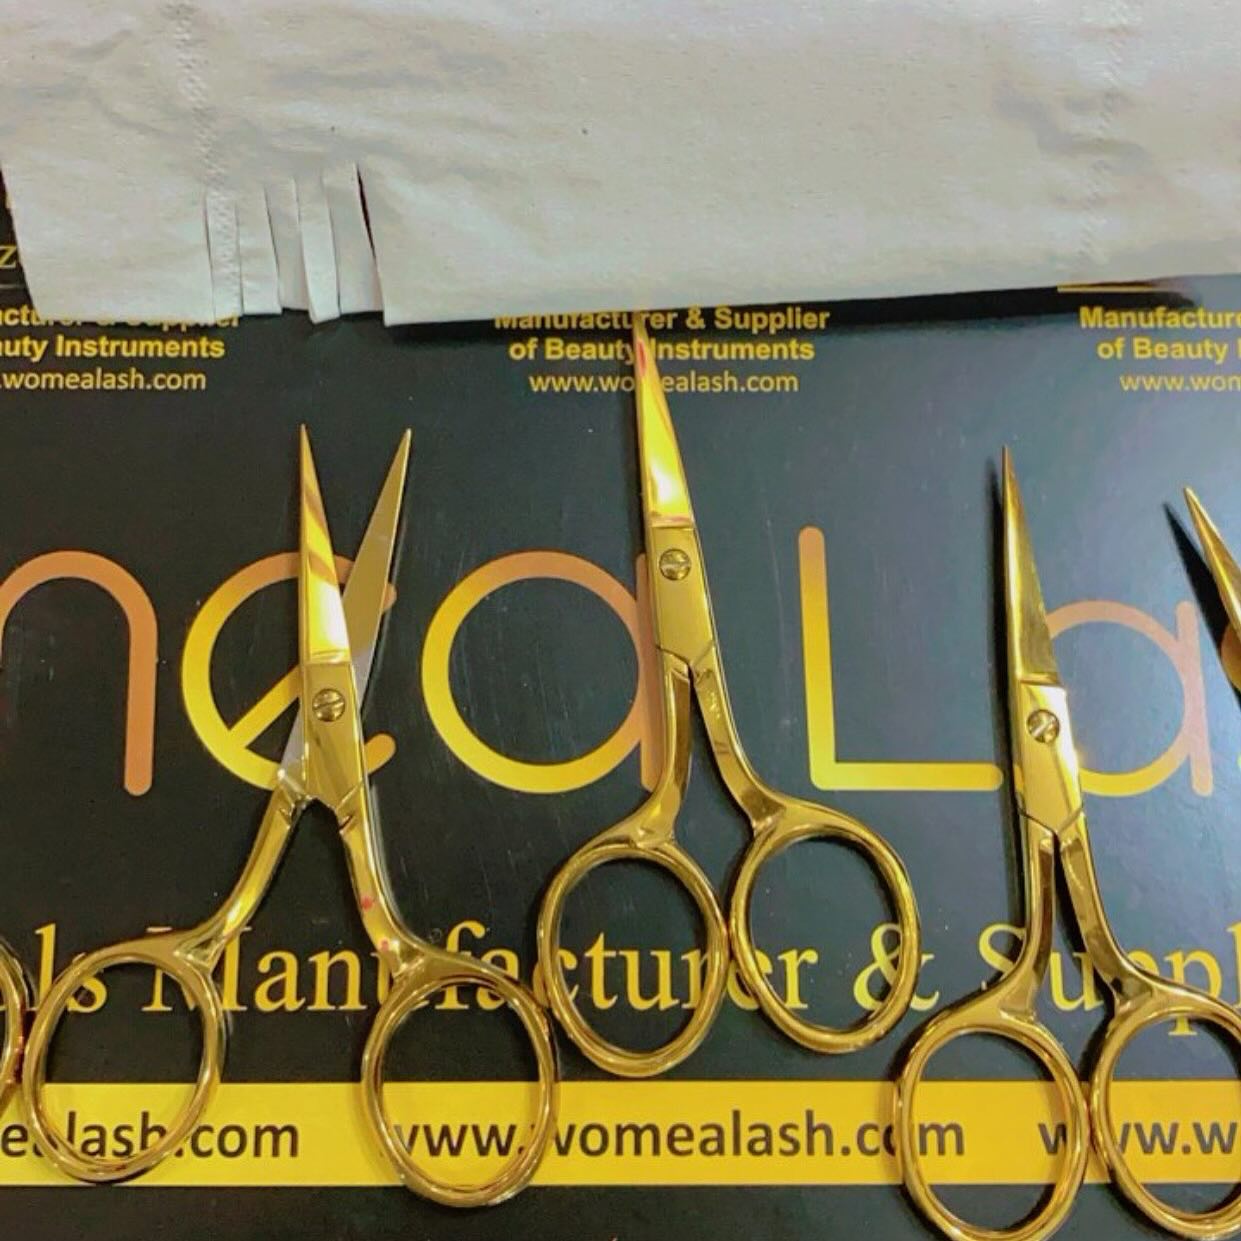 Eyebrow Trimming Scissors by Womea Lash